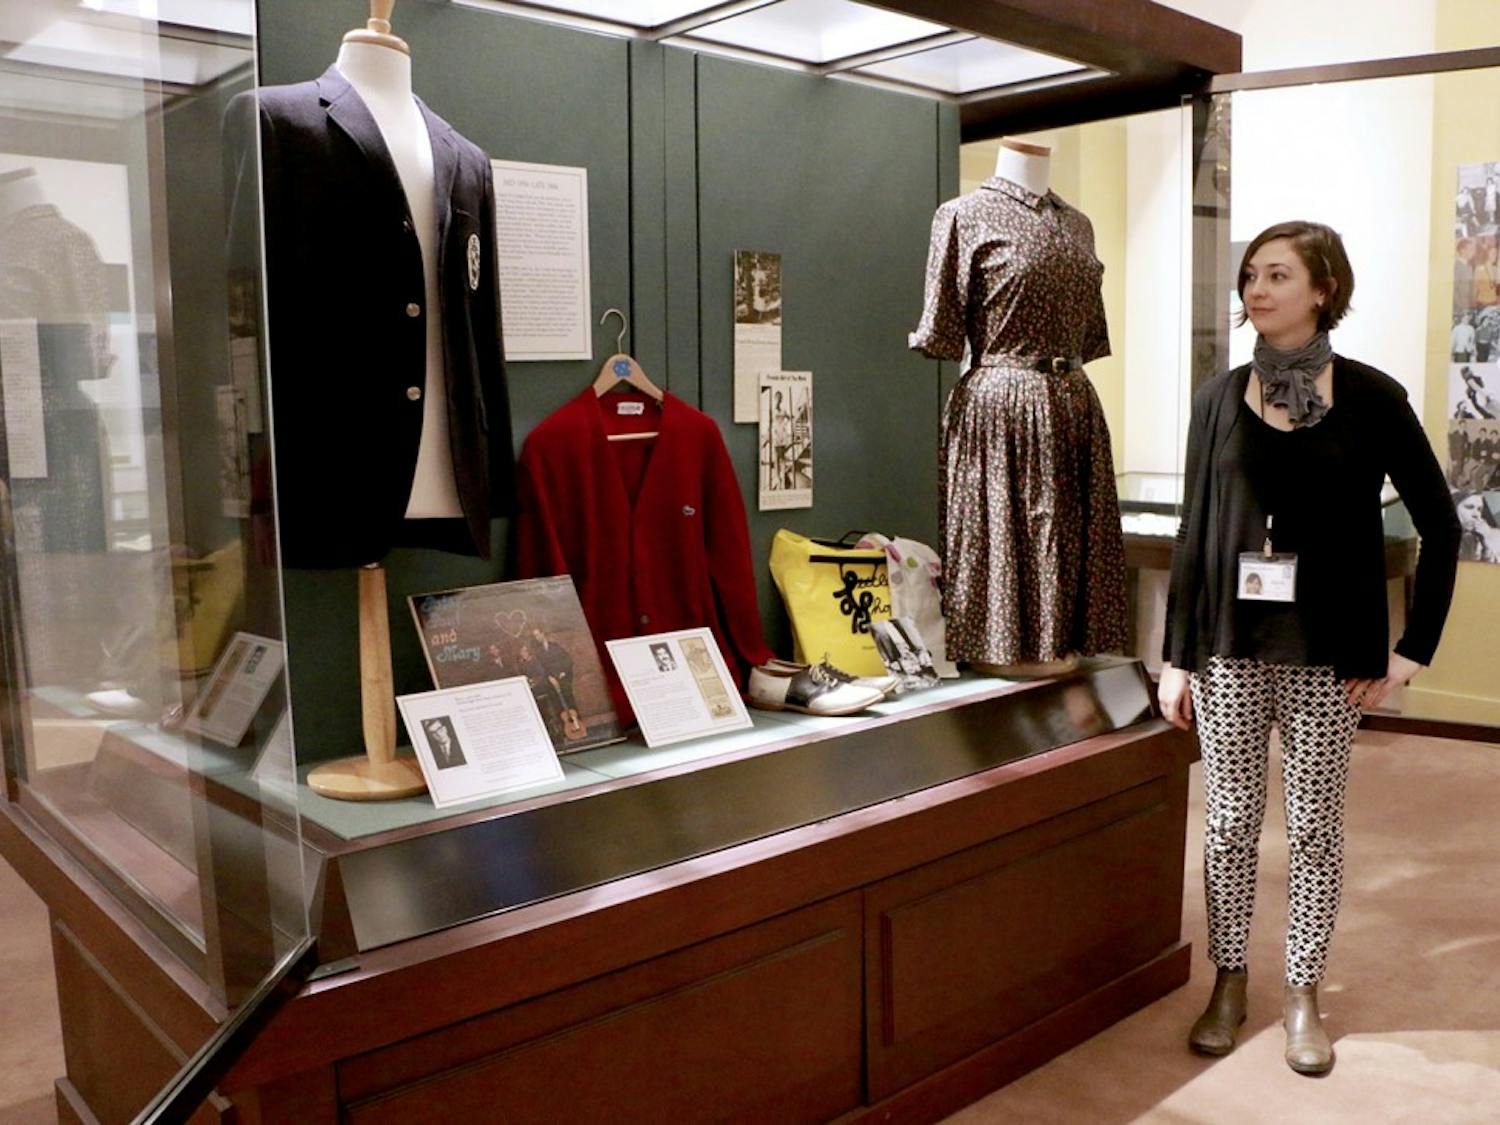 Emily Jack, the Digital Projects and Outreach Librarian for the North Carolina Collection Gallery, stands next to a display featuring clothing from the 1950s-1970s in the exhibition From Frock Coats to Flip-flops: 100 Years of Fashion at Carolina. The exhibition opened in Wilson Library this Thursday and includes nearly 60 items of clothing along with photographs, news ads, articles and excerpts from old student handbooks. 